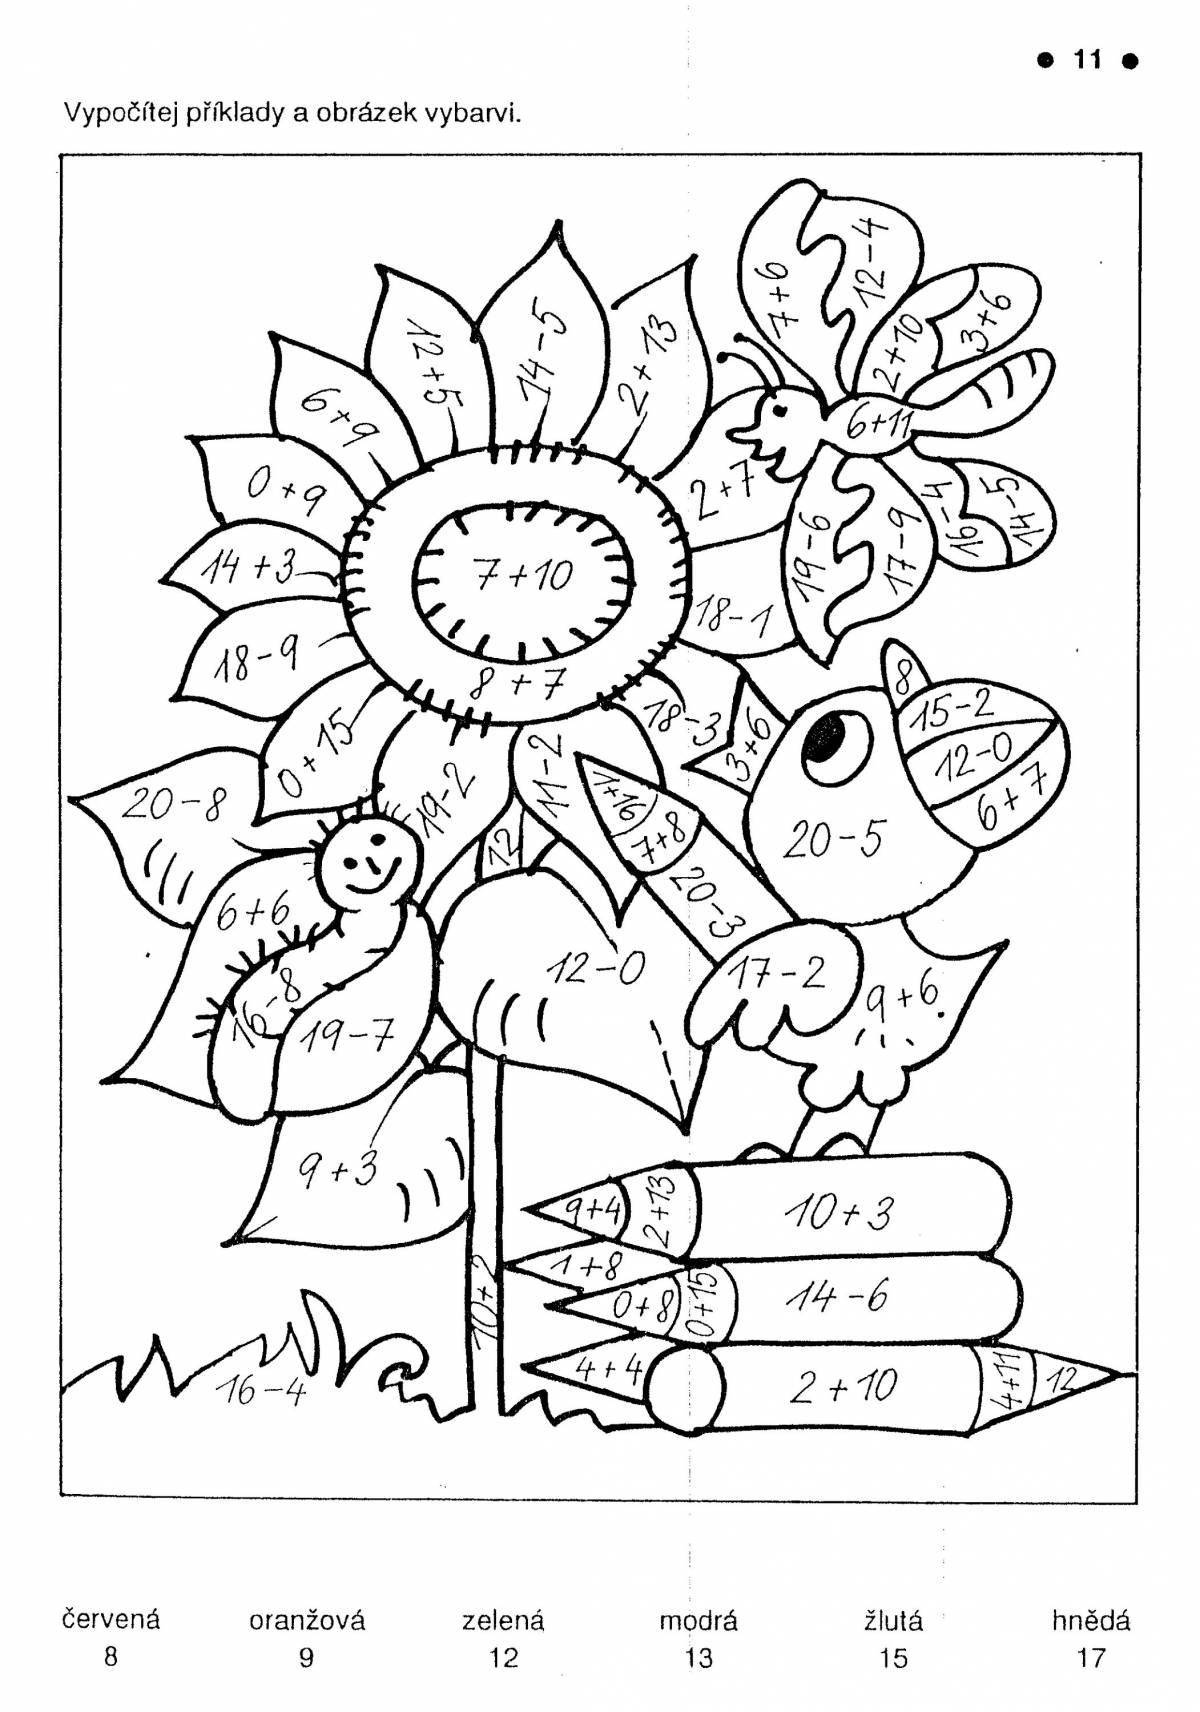 Great 20 year old addition math coloring book